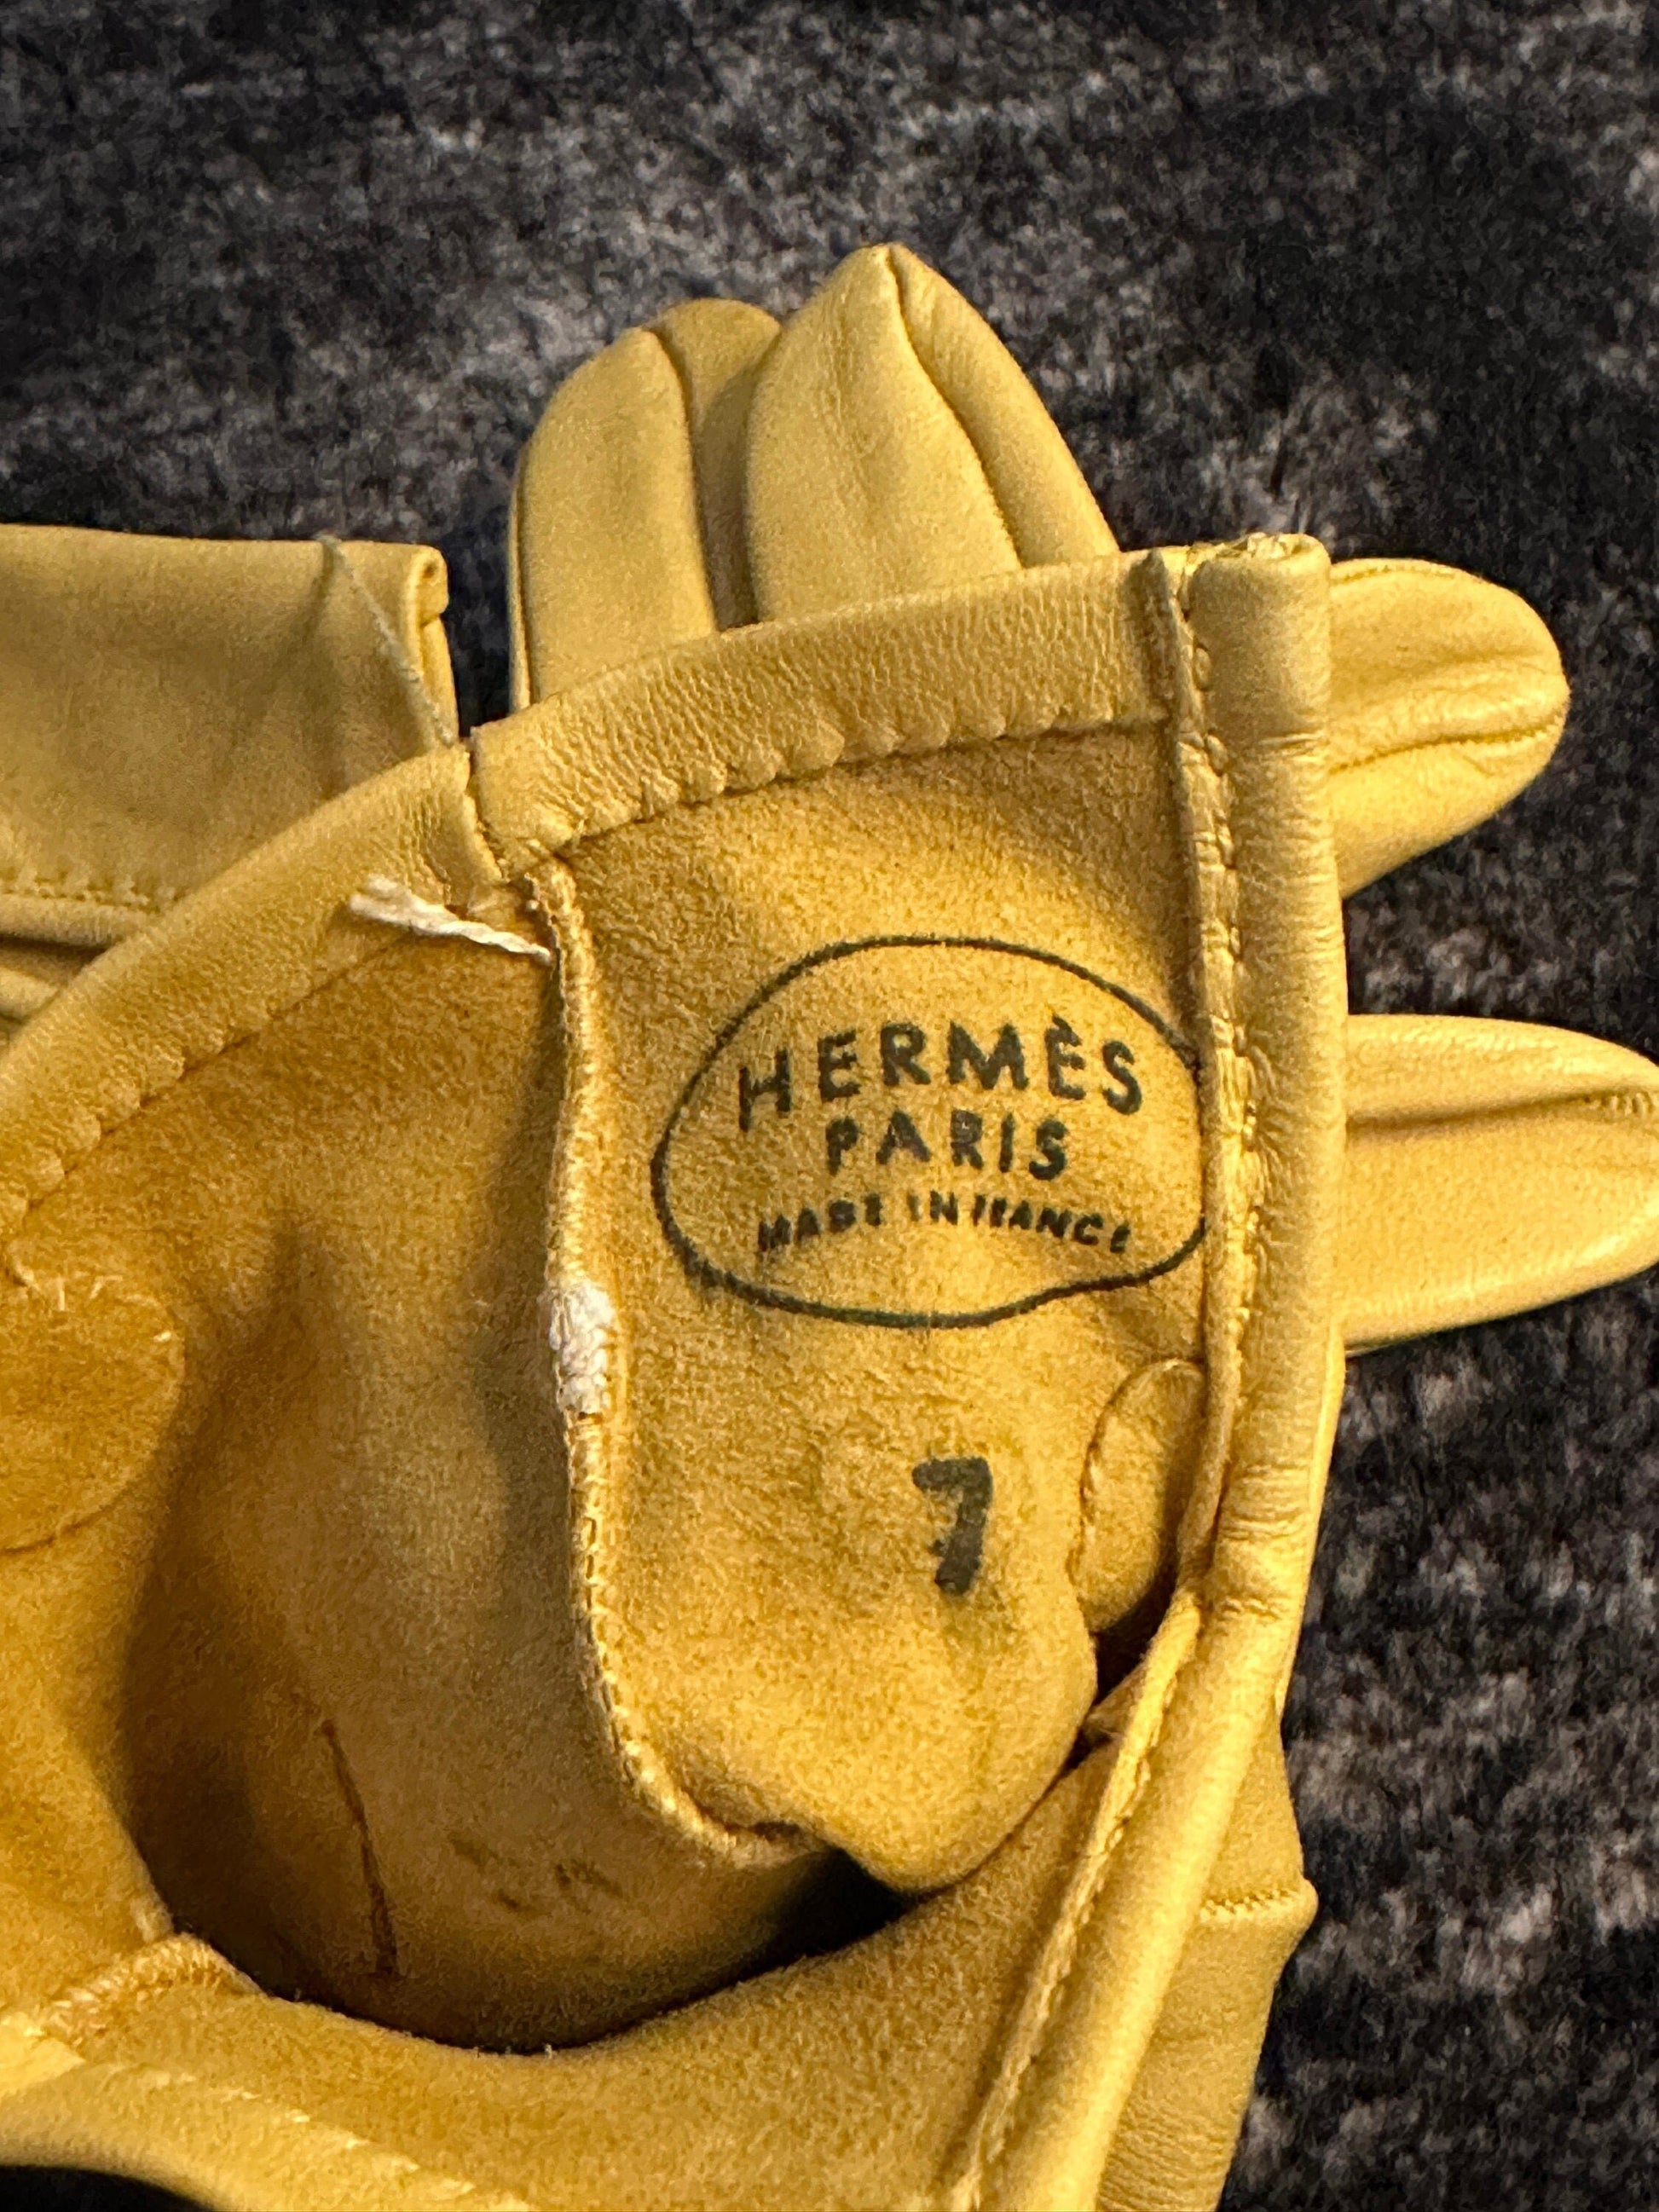 HERMES VINTAGE 100% Genuine Lamb Skin Gloves, Yellow, Great Condition, Grade AB